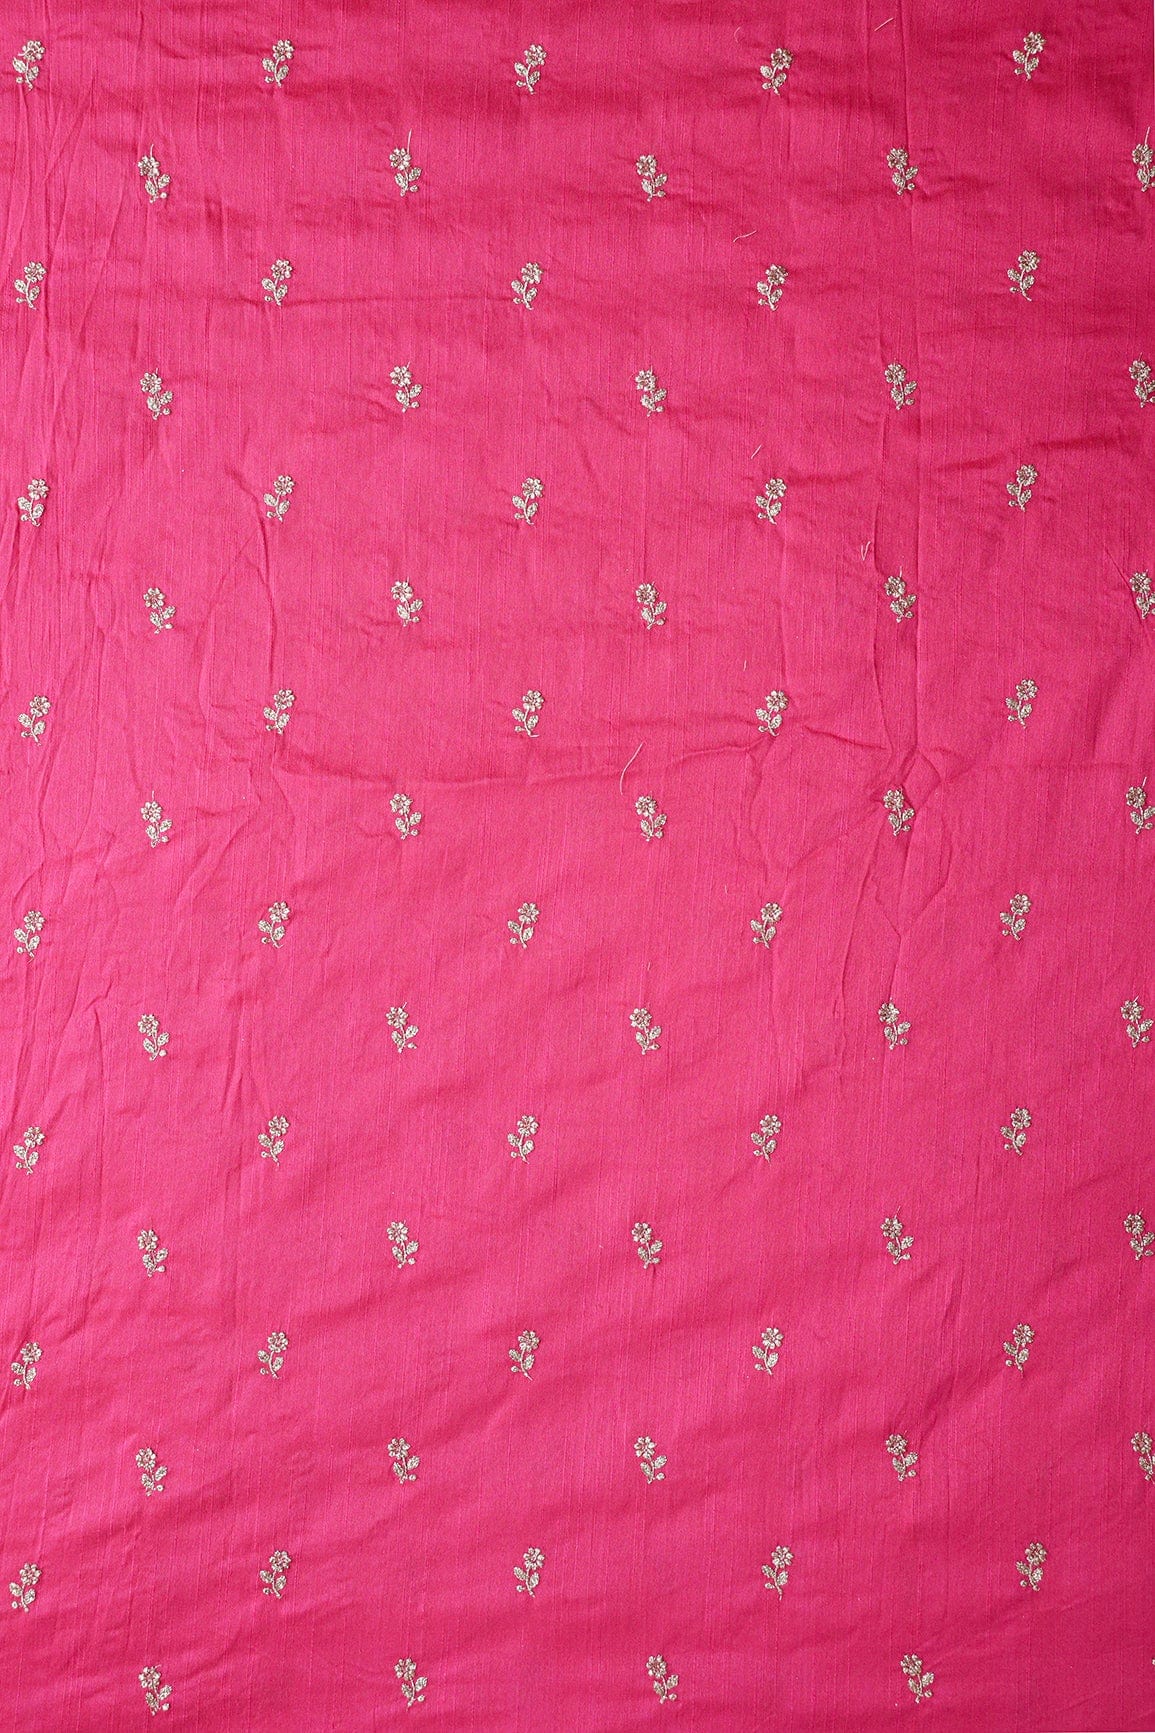 doeraa Embroidery Fabrics Gold Sequins With Gold Zari Small Floral Motif Embroidery Work On Fuchsia Raw Silk Fabric